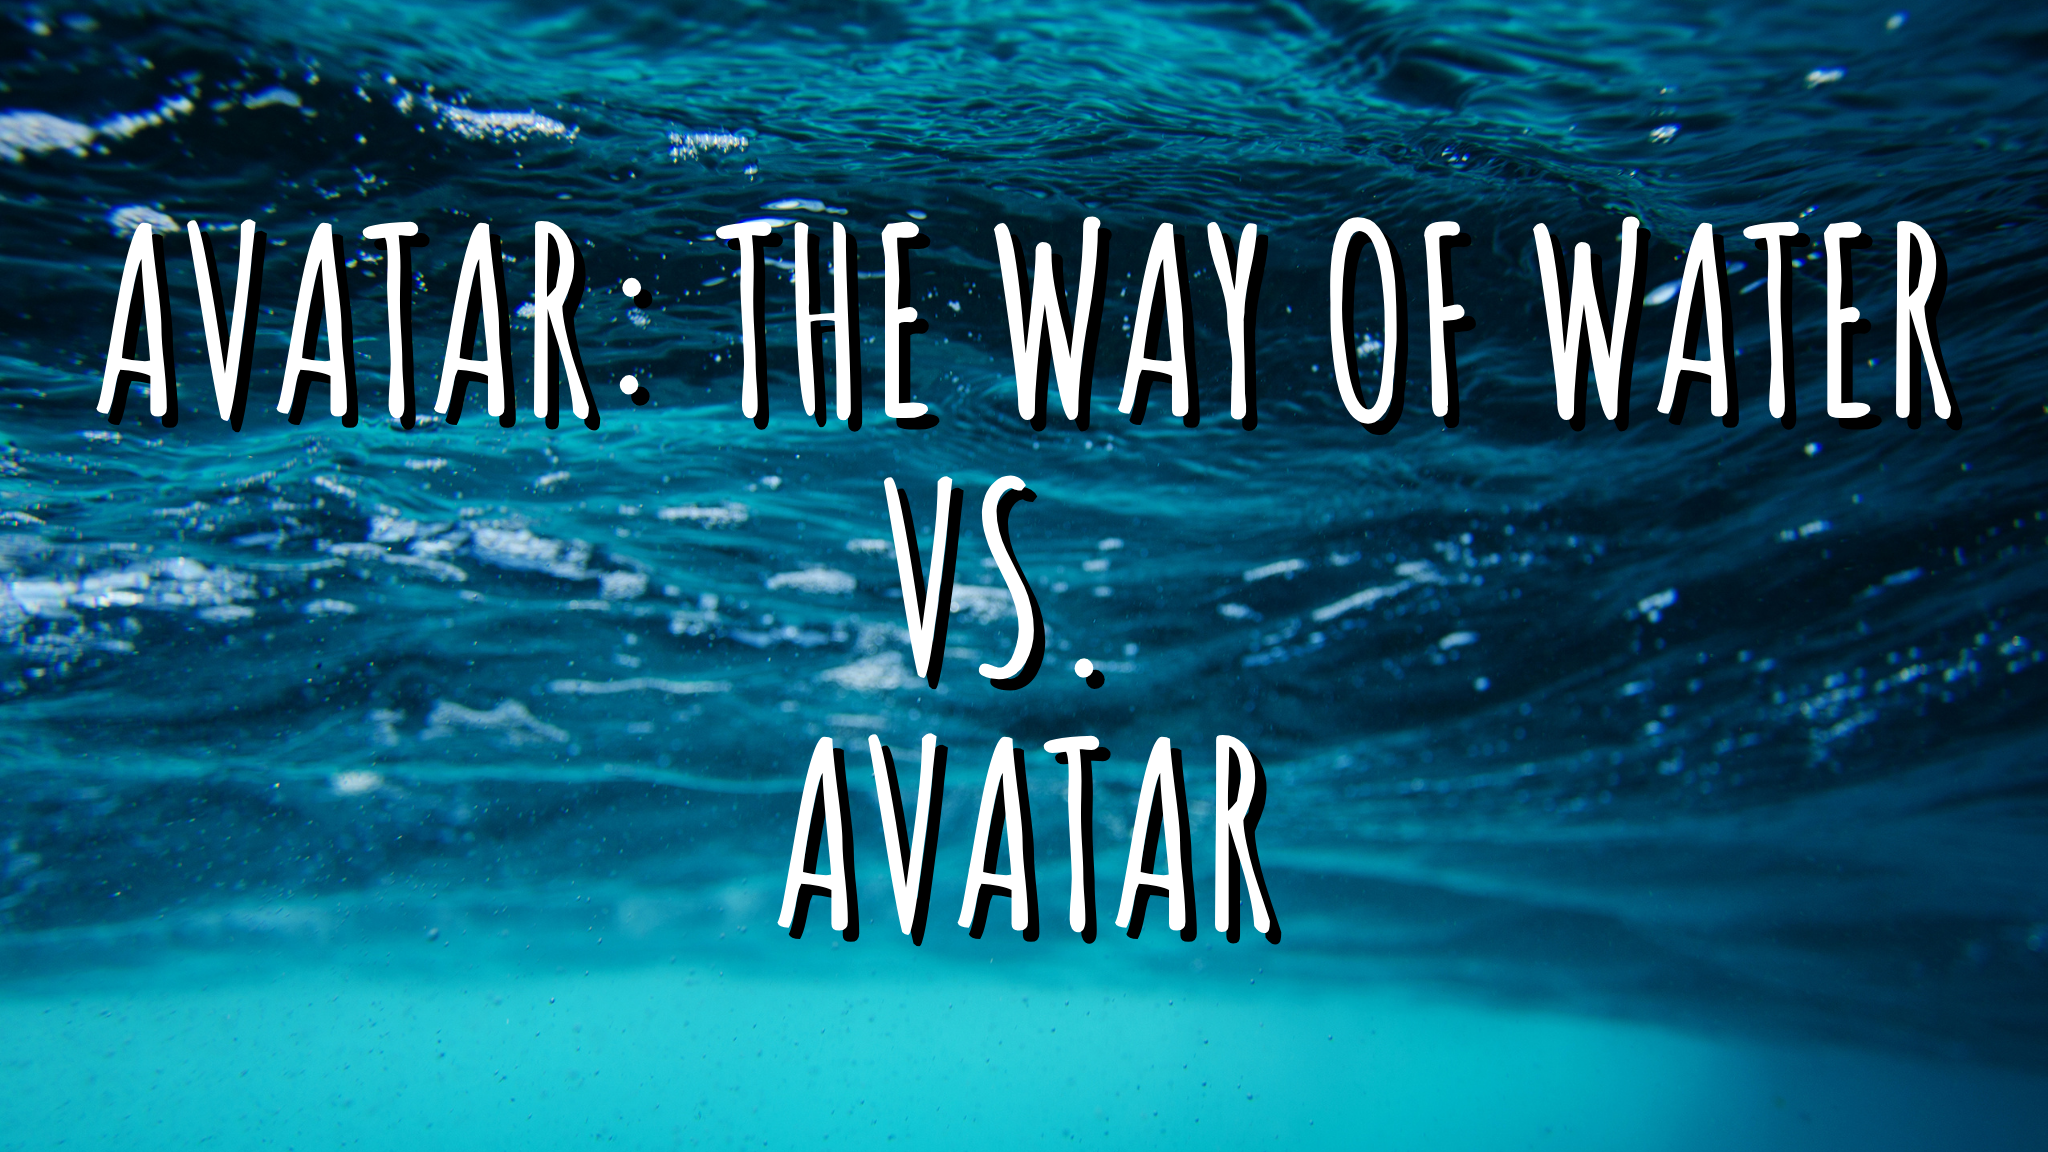 Avatar: The Way Of Water VS. Avatar - Spectacle and Structure Jacob Krueger Studio Write Your Screenplay Podcast